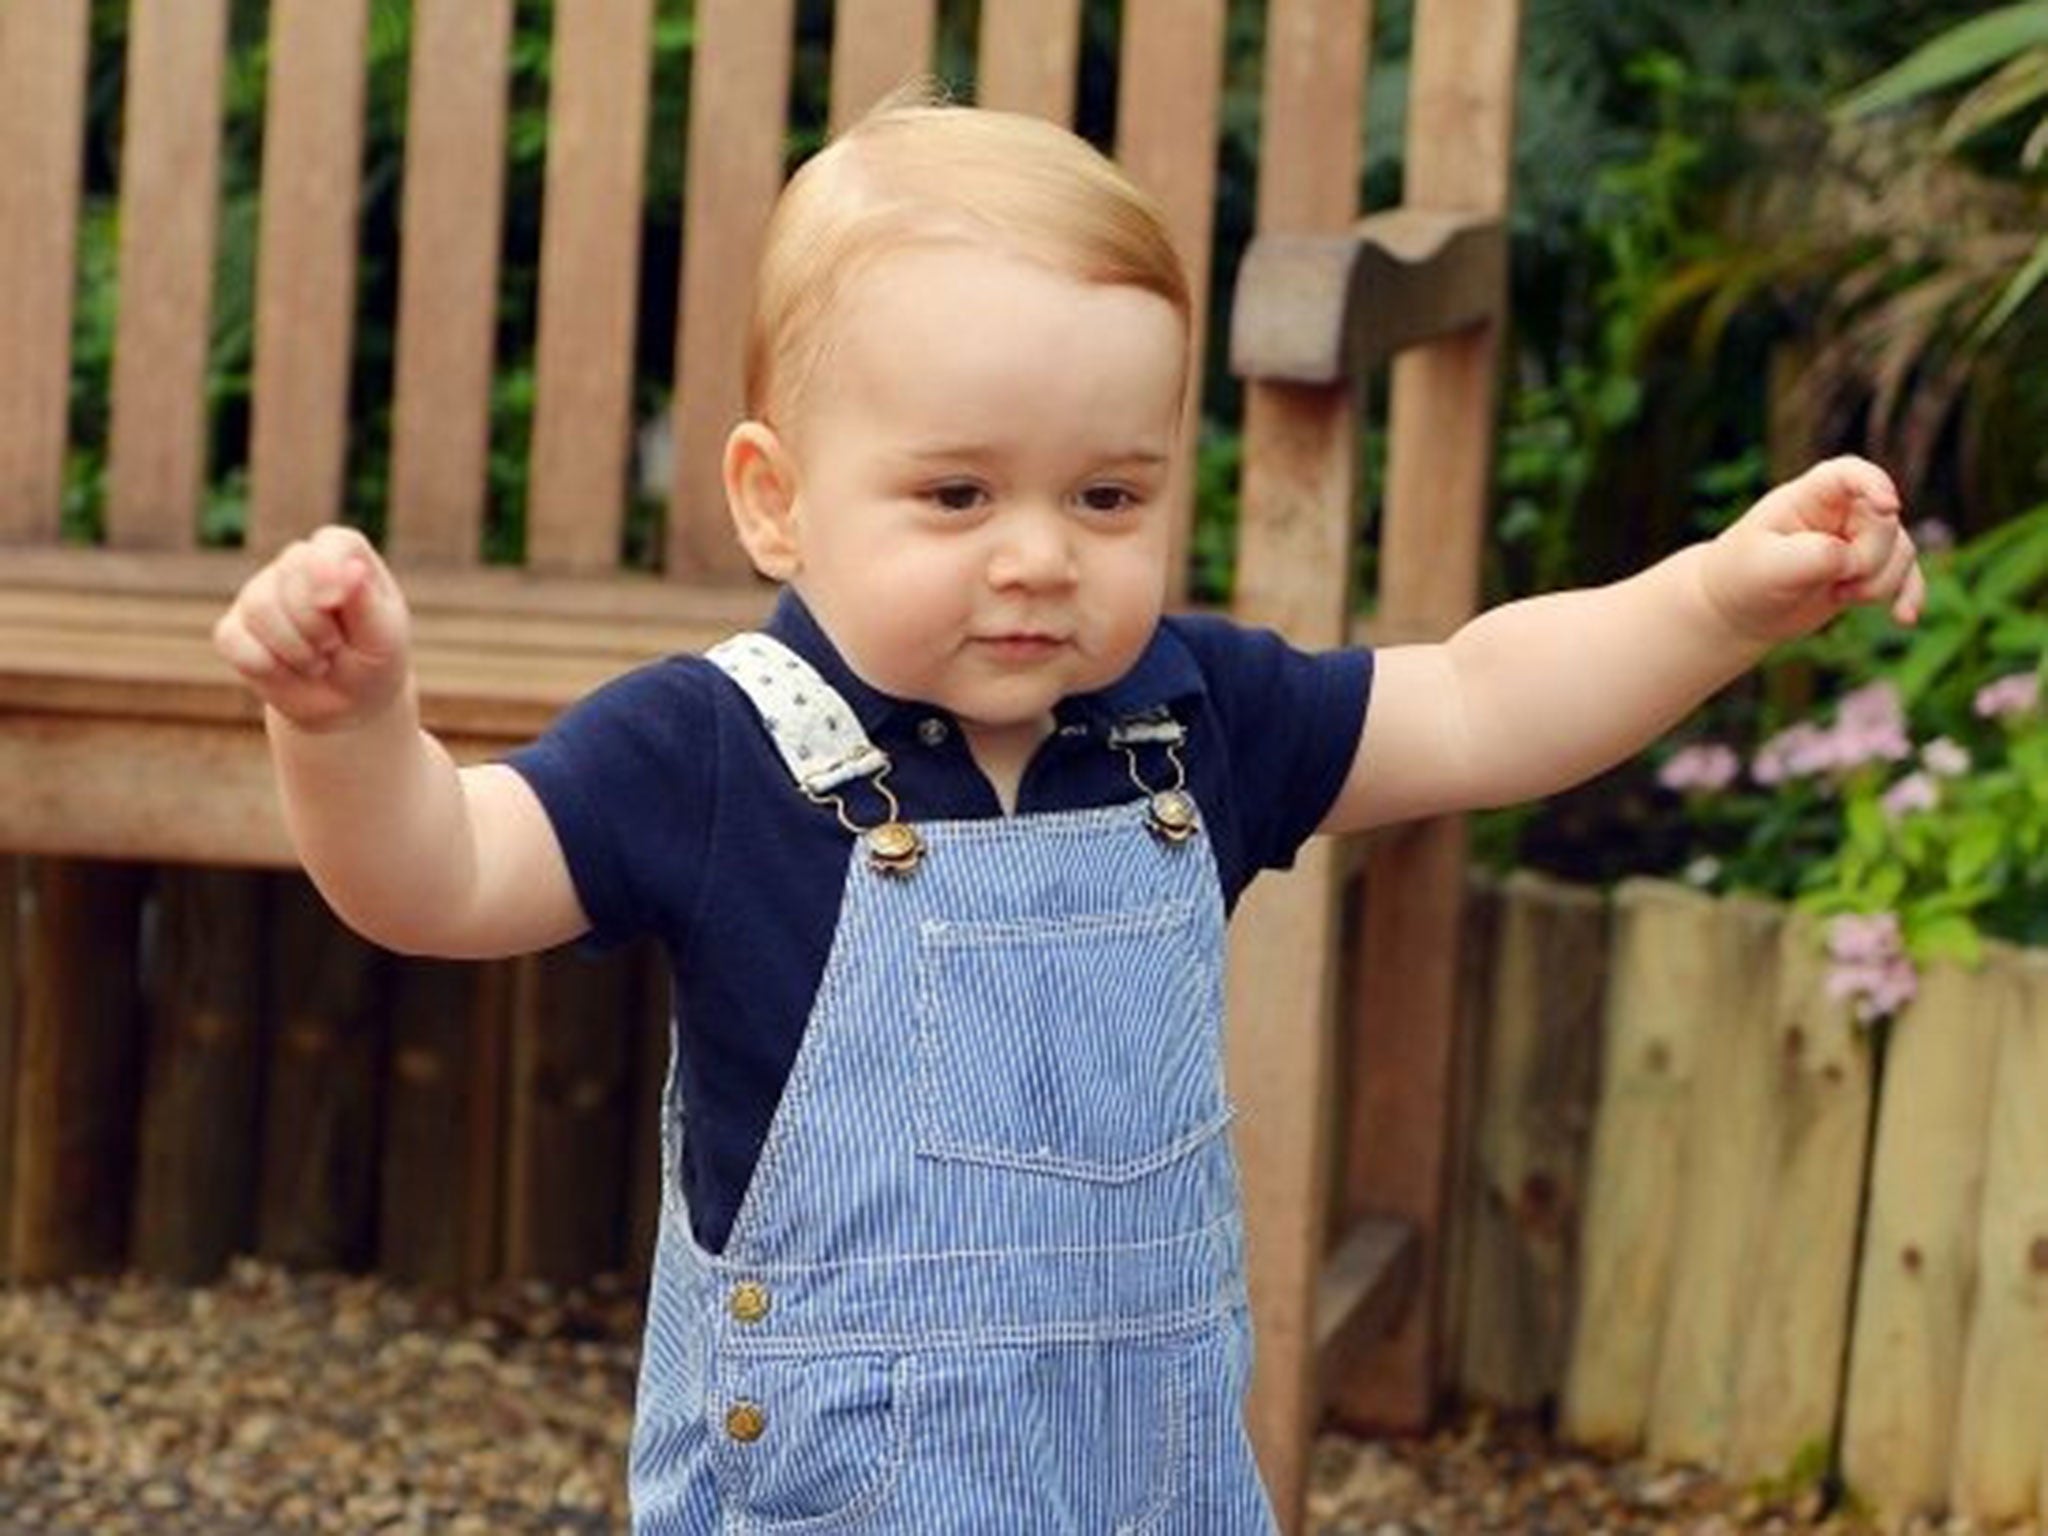 Prince George's pictured on his first birthday at the Natural History Museum, London